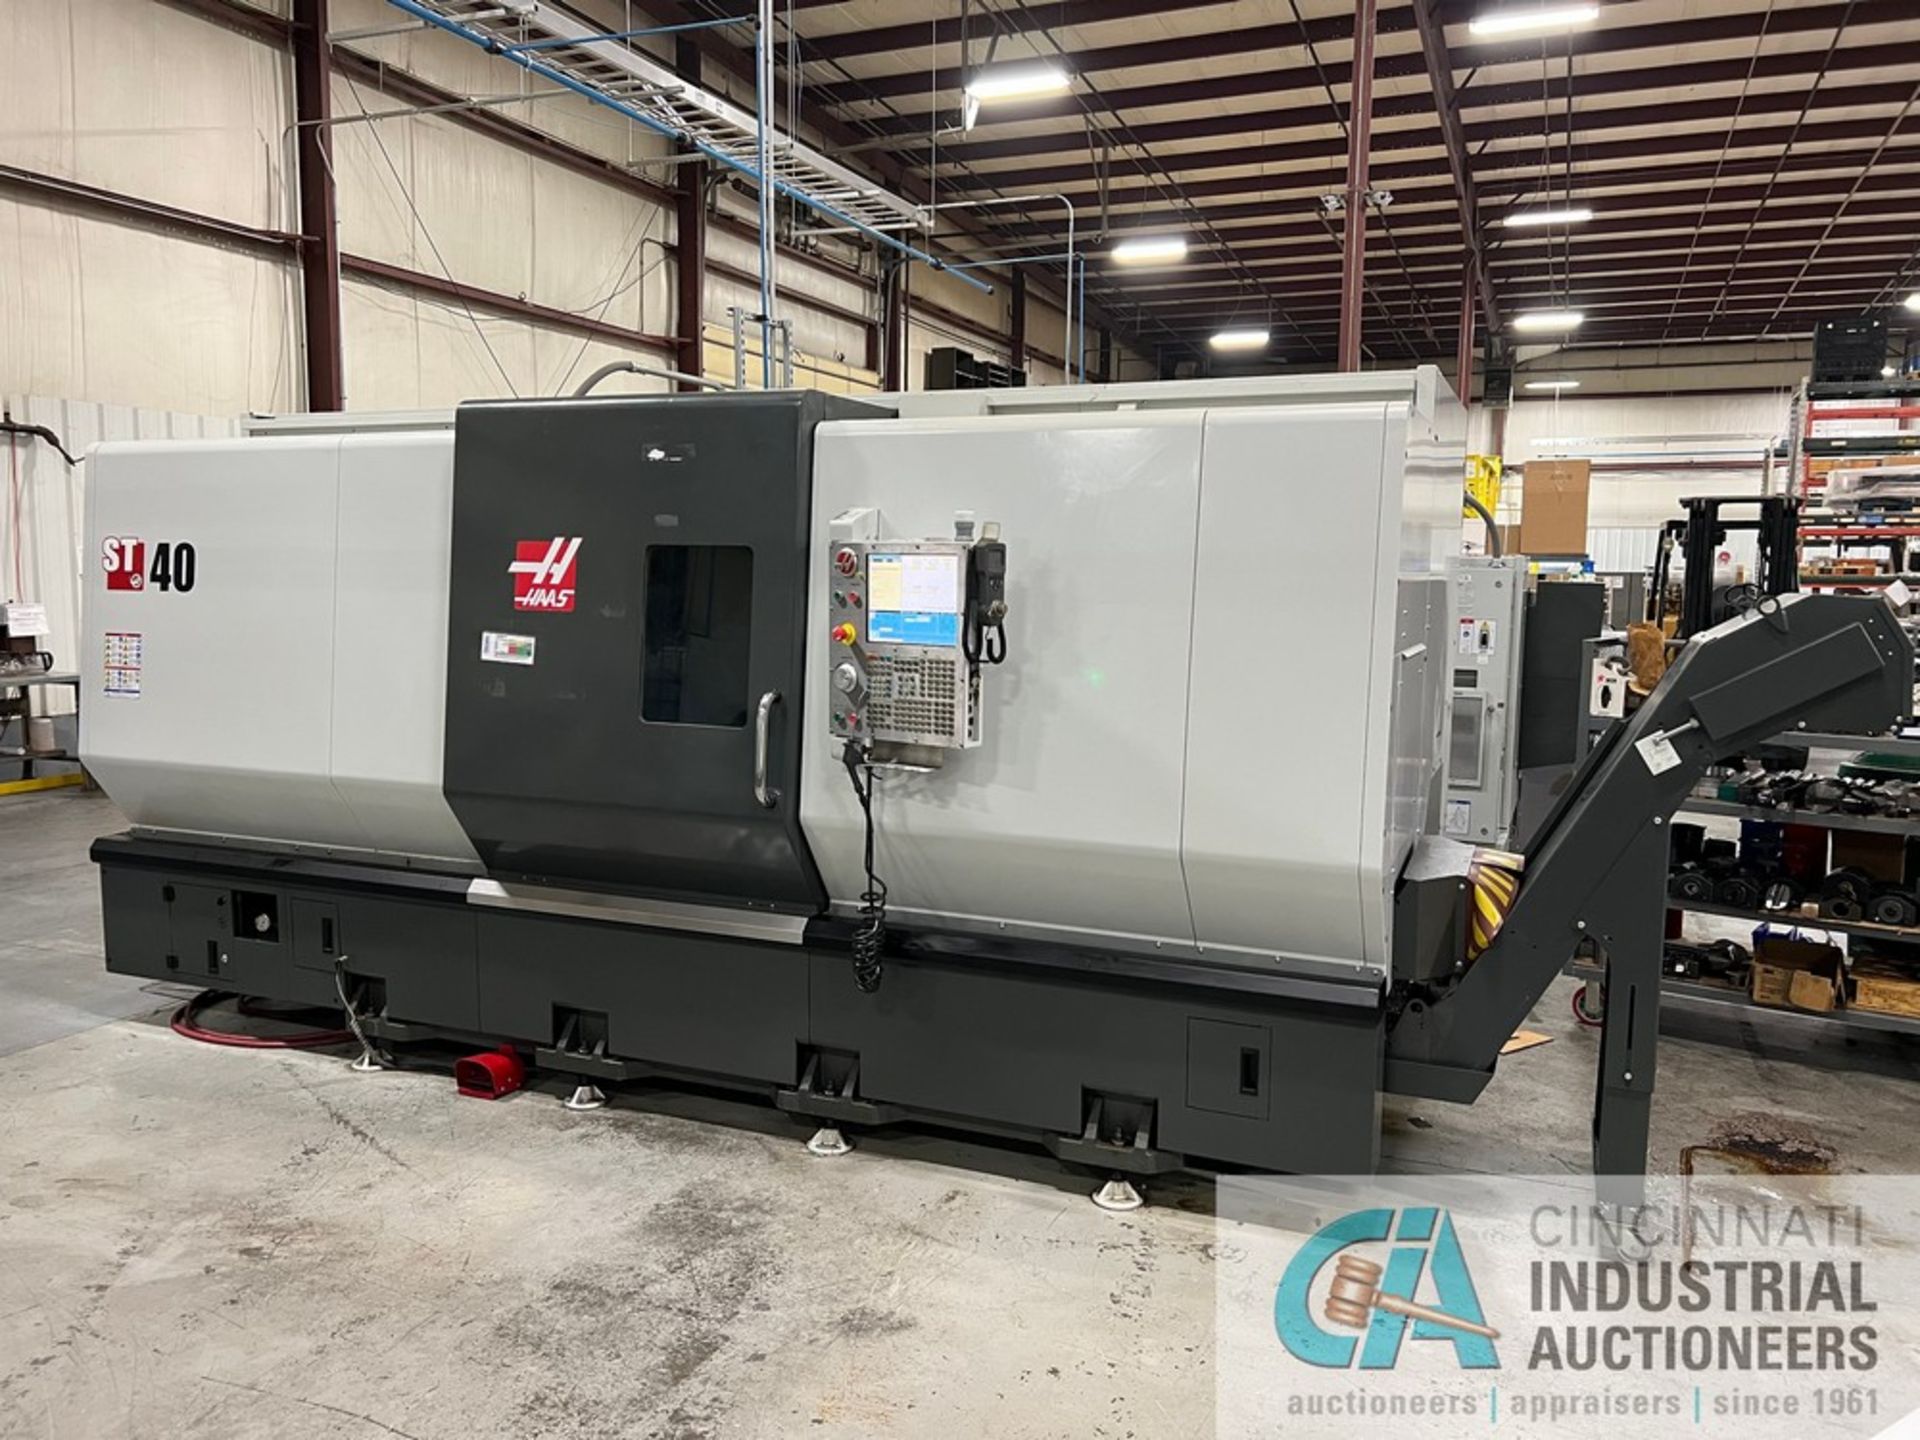 Haas Model ST-40 CNC Turning Center (2014) 1,788 Cutting Hours Showing